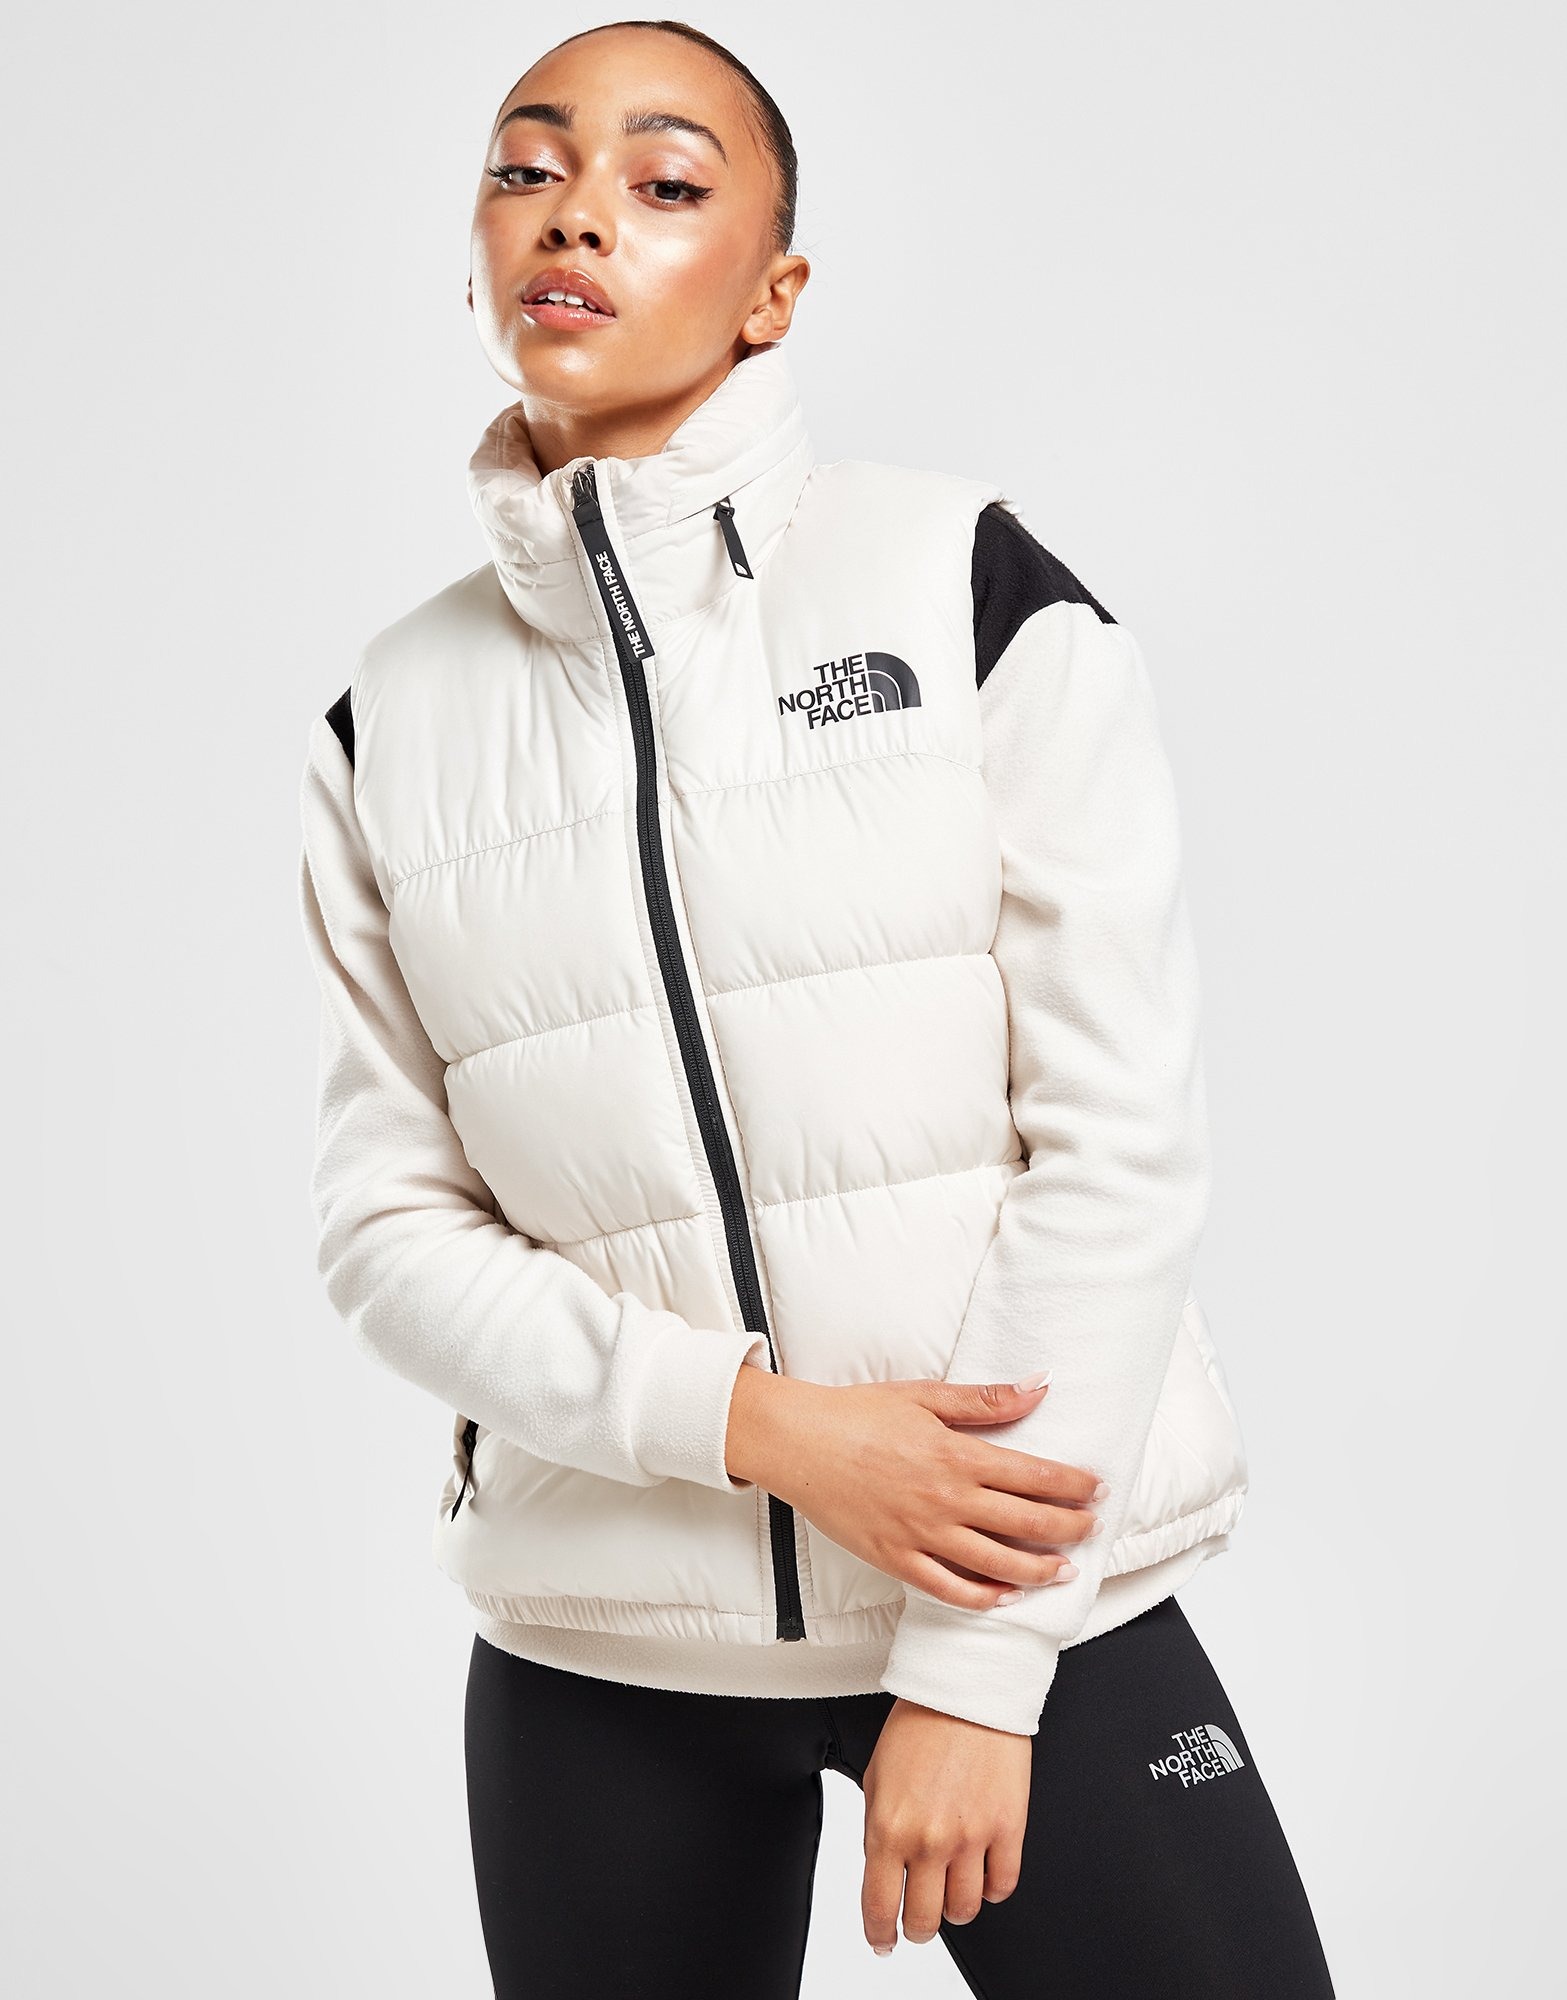 gilet north face